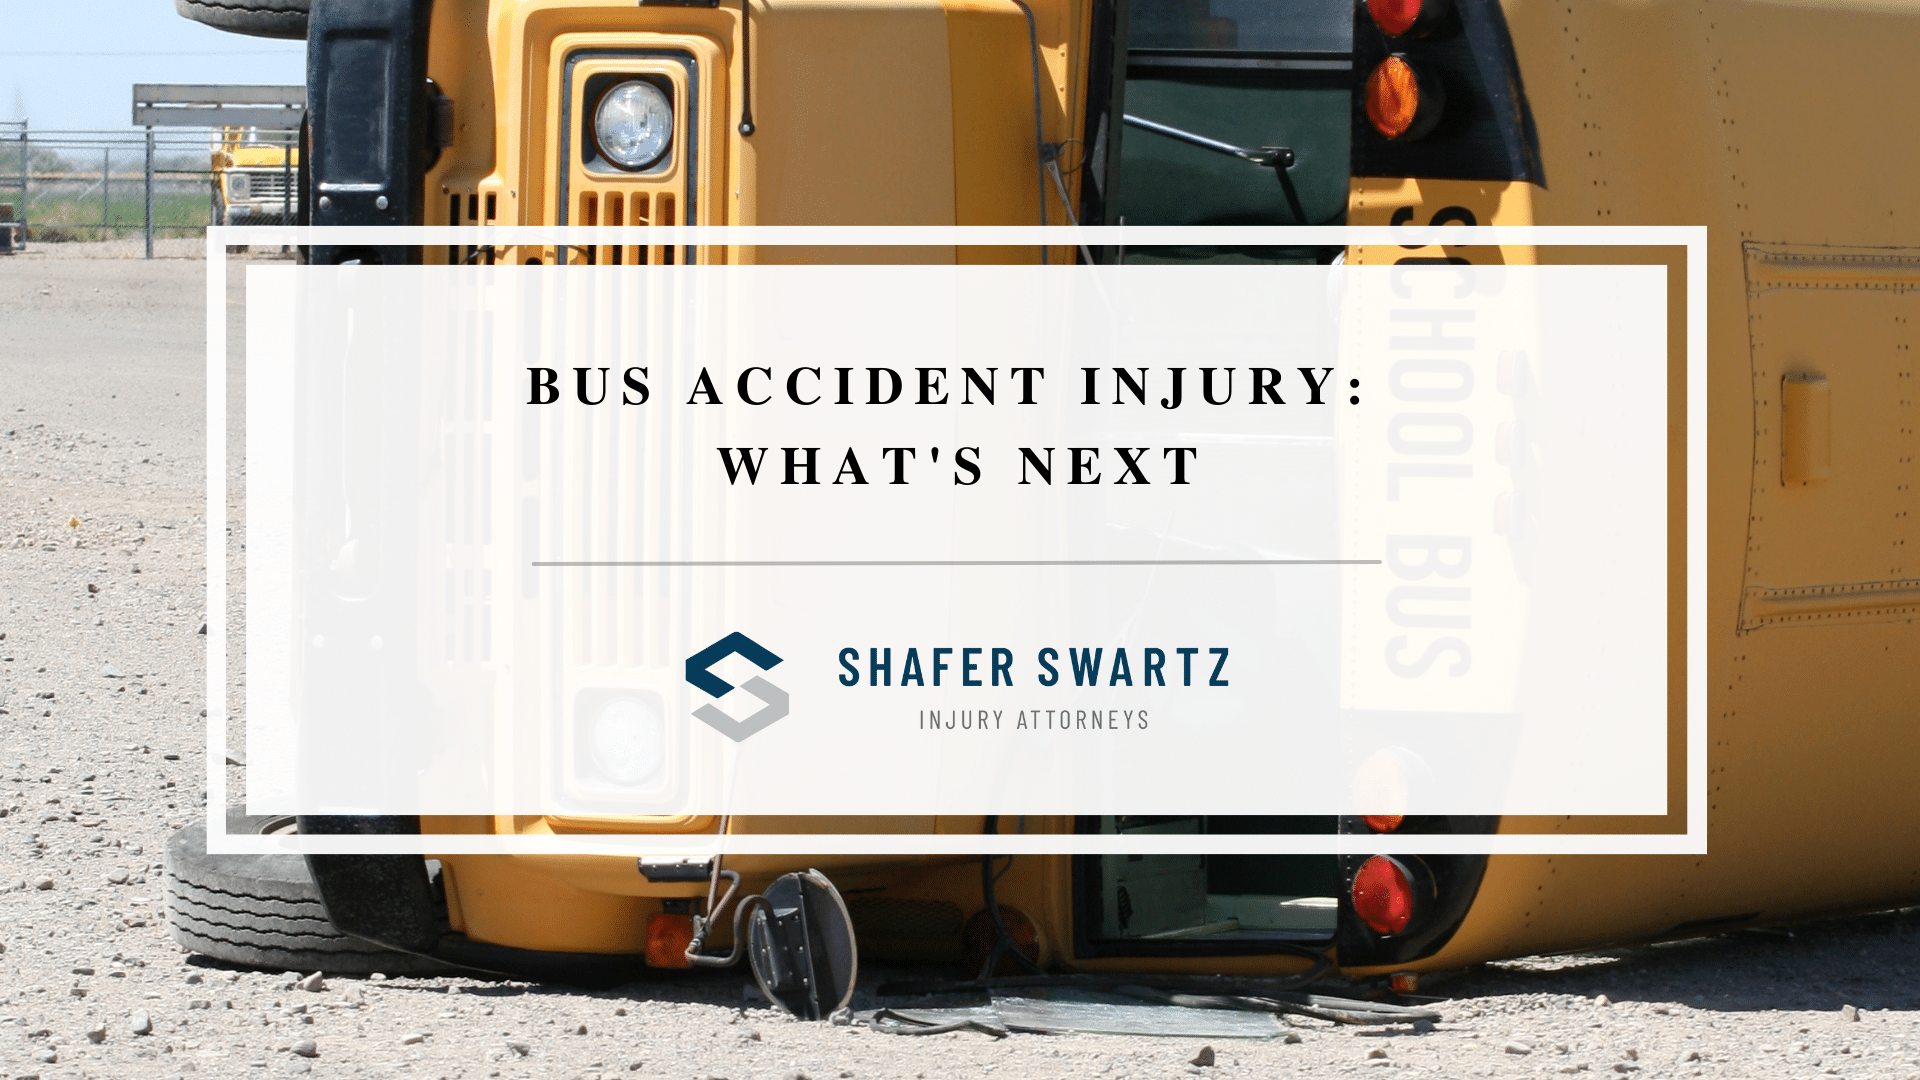 Featured image of bus accident injury: what's next